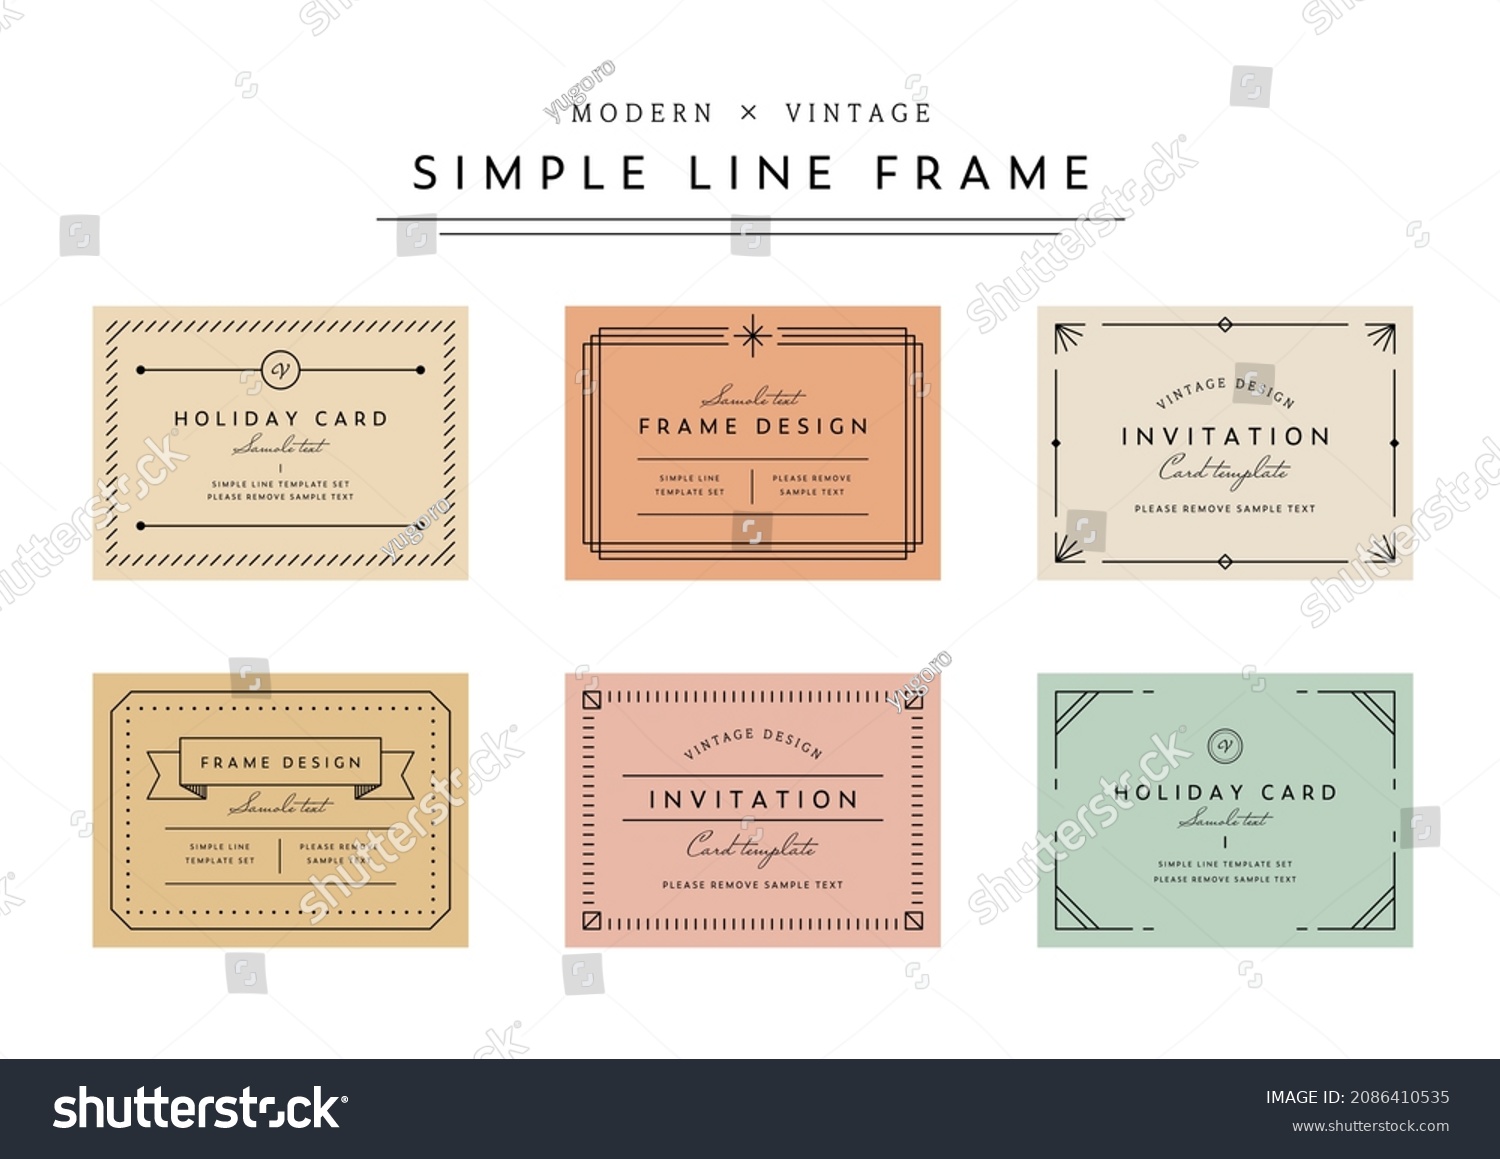 stock-vector-a-set-of-vintage-frames-with-simple-lines-this-illustration-relates-to-elegance-classic-retro-2086410535